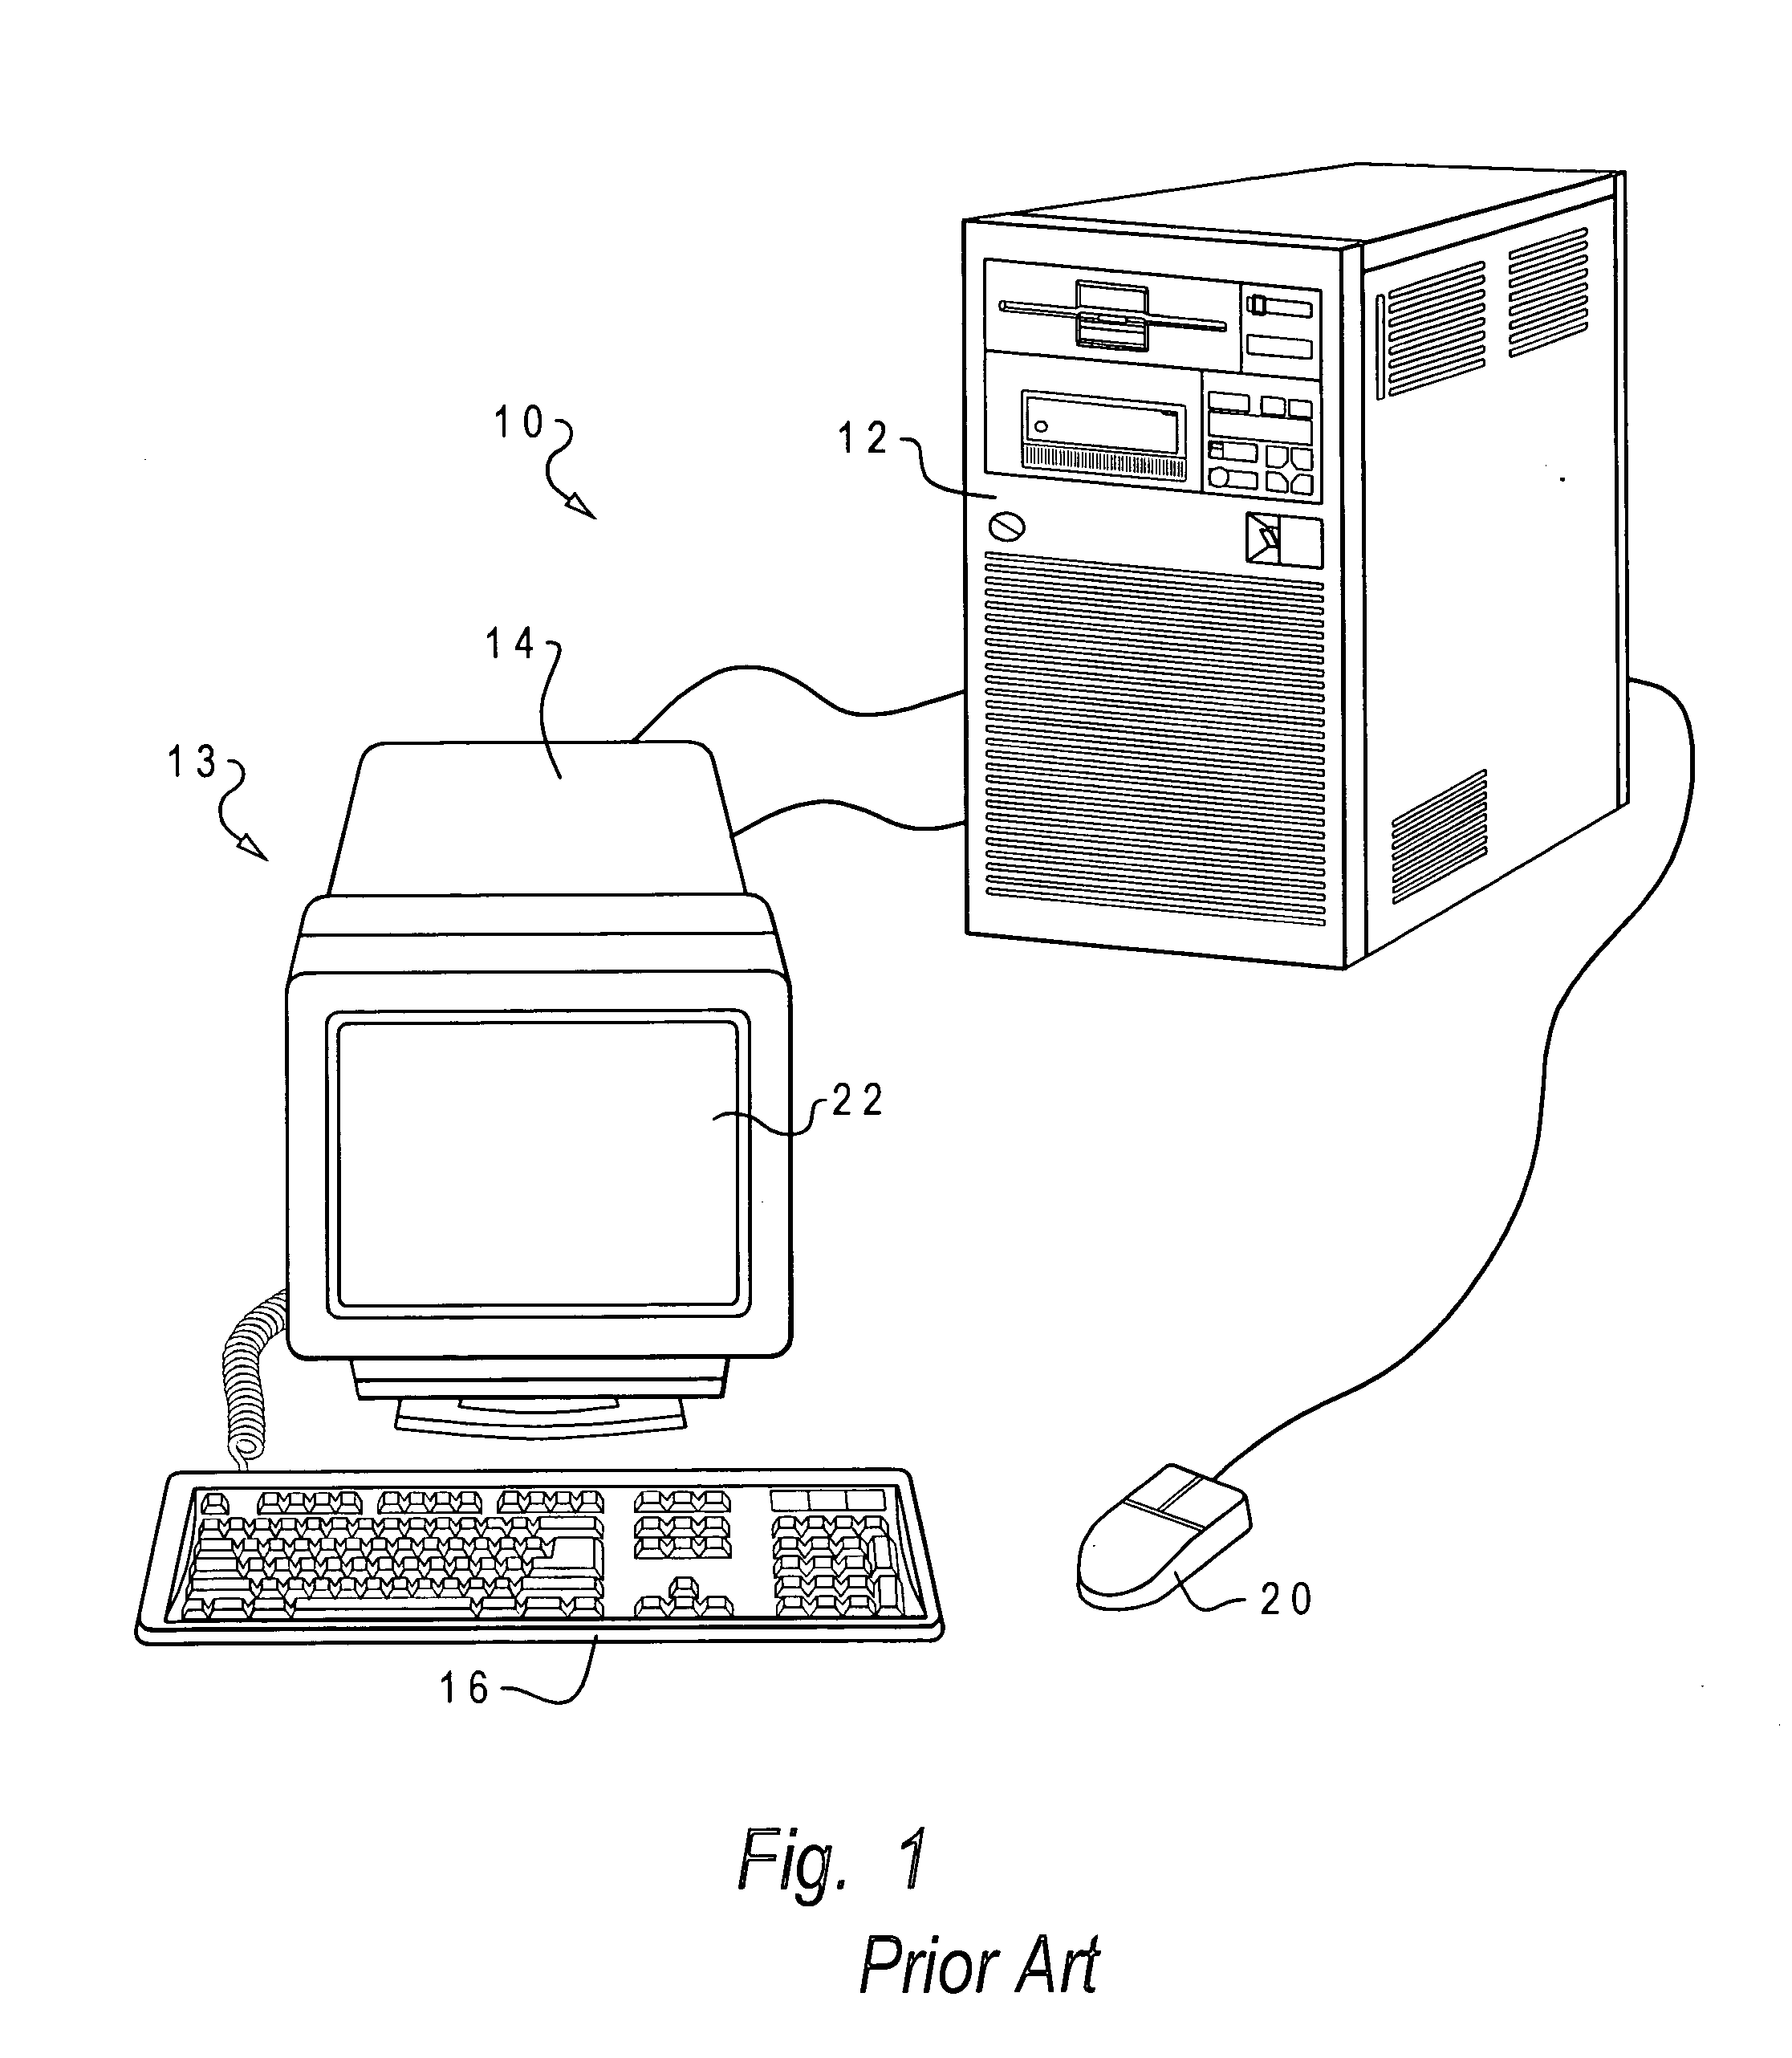 Method, system and program product for defining and recording minium and maximum event counts of a simulation utilizing a high level language